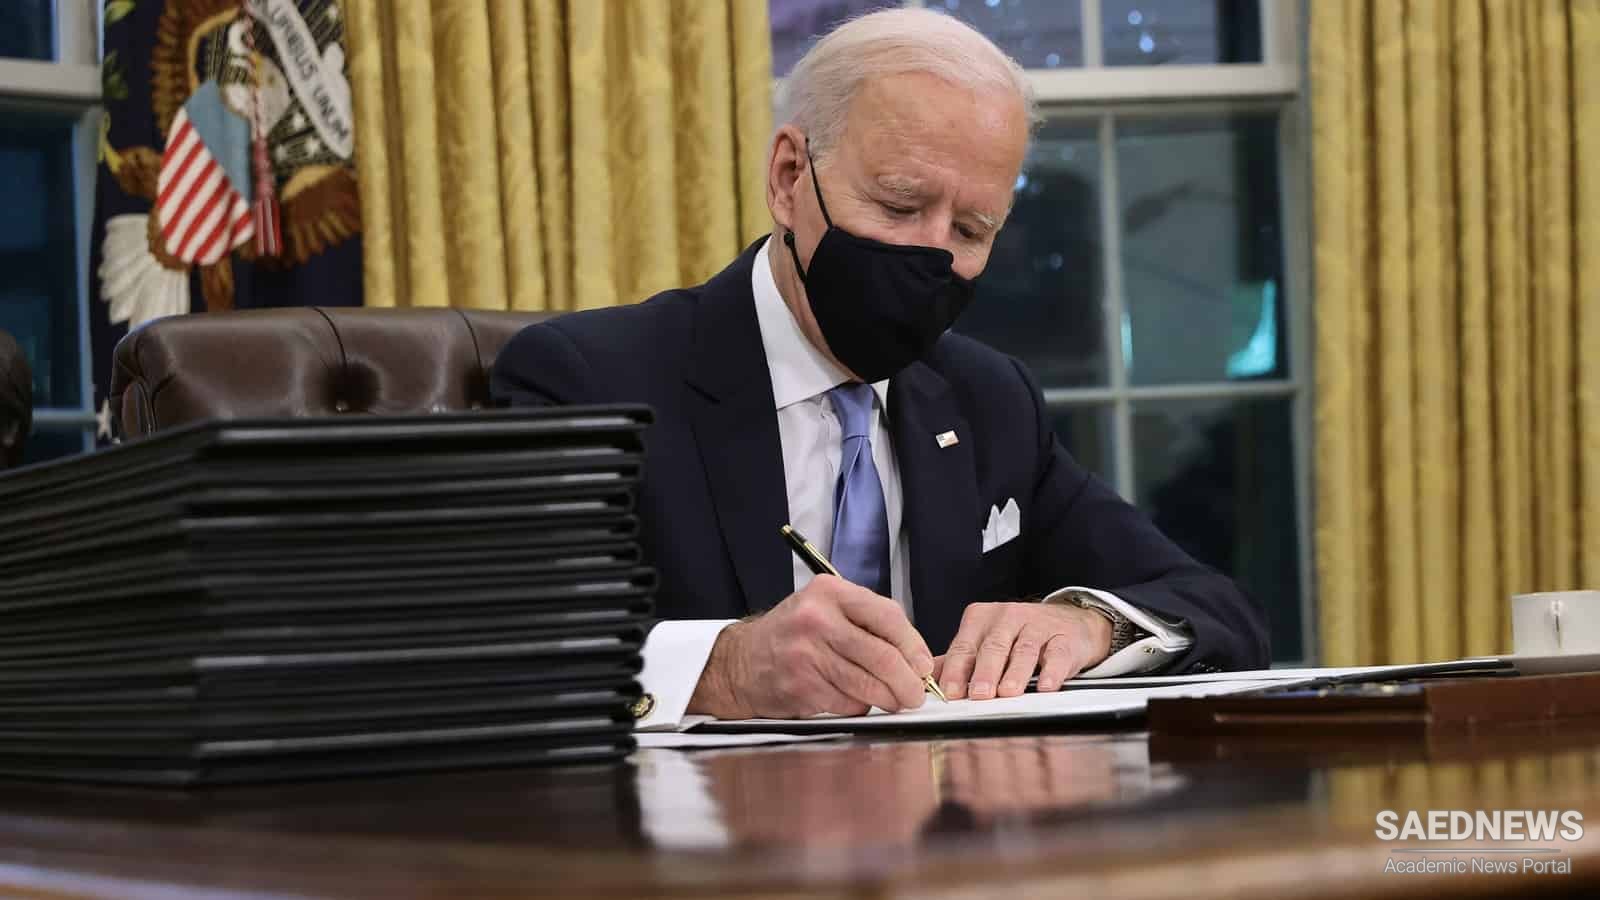 President Biden Decides to Let the Intelligence Community to Comment on Trump's Access to Security Info